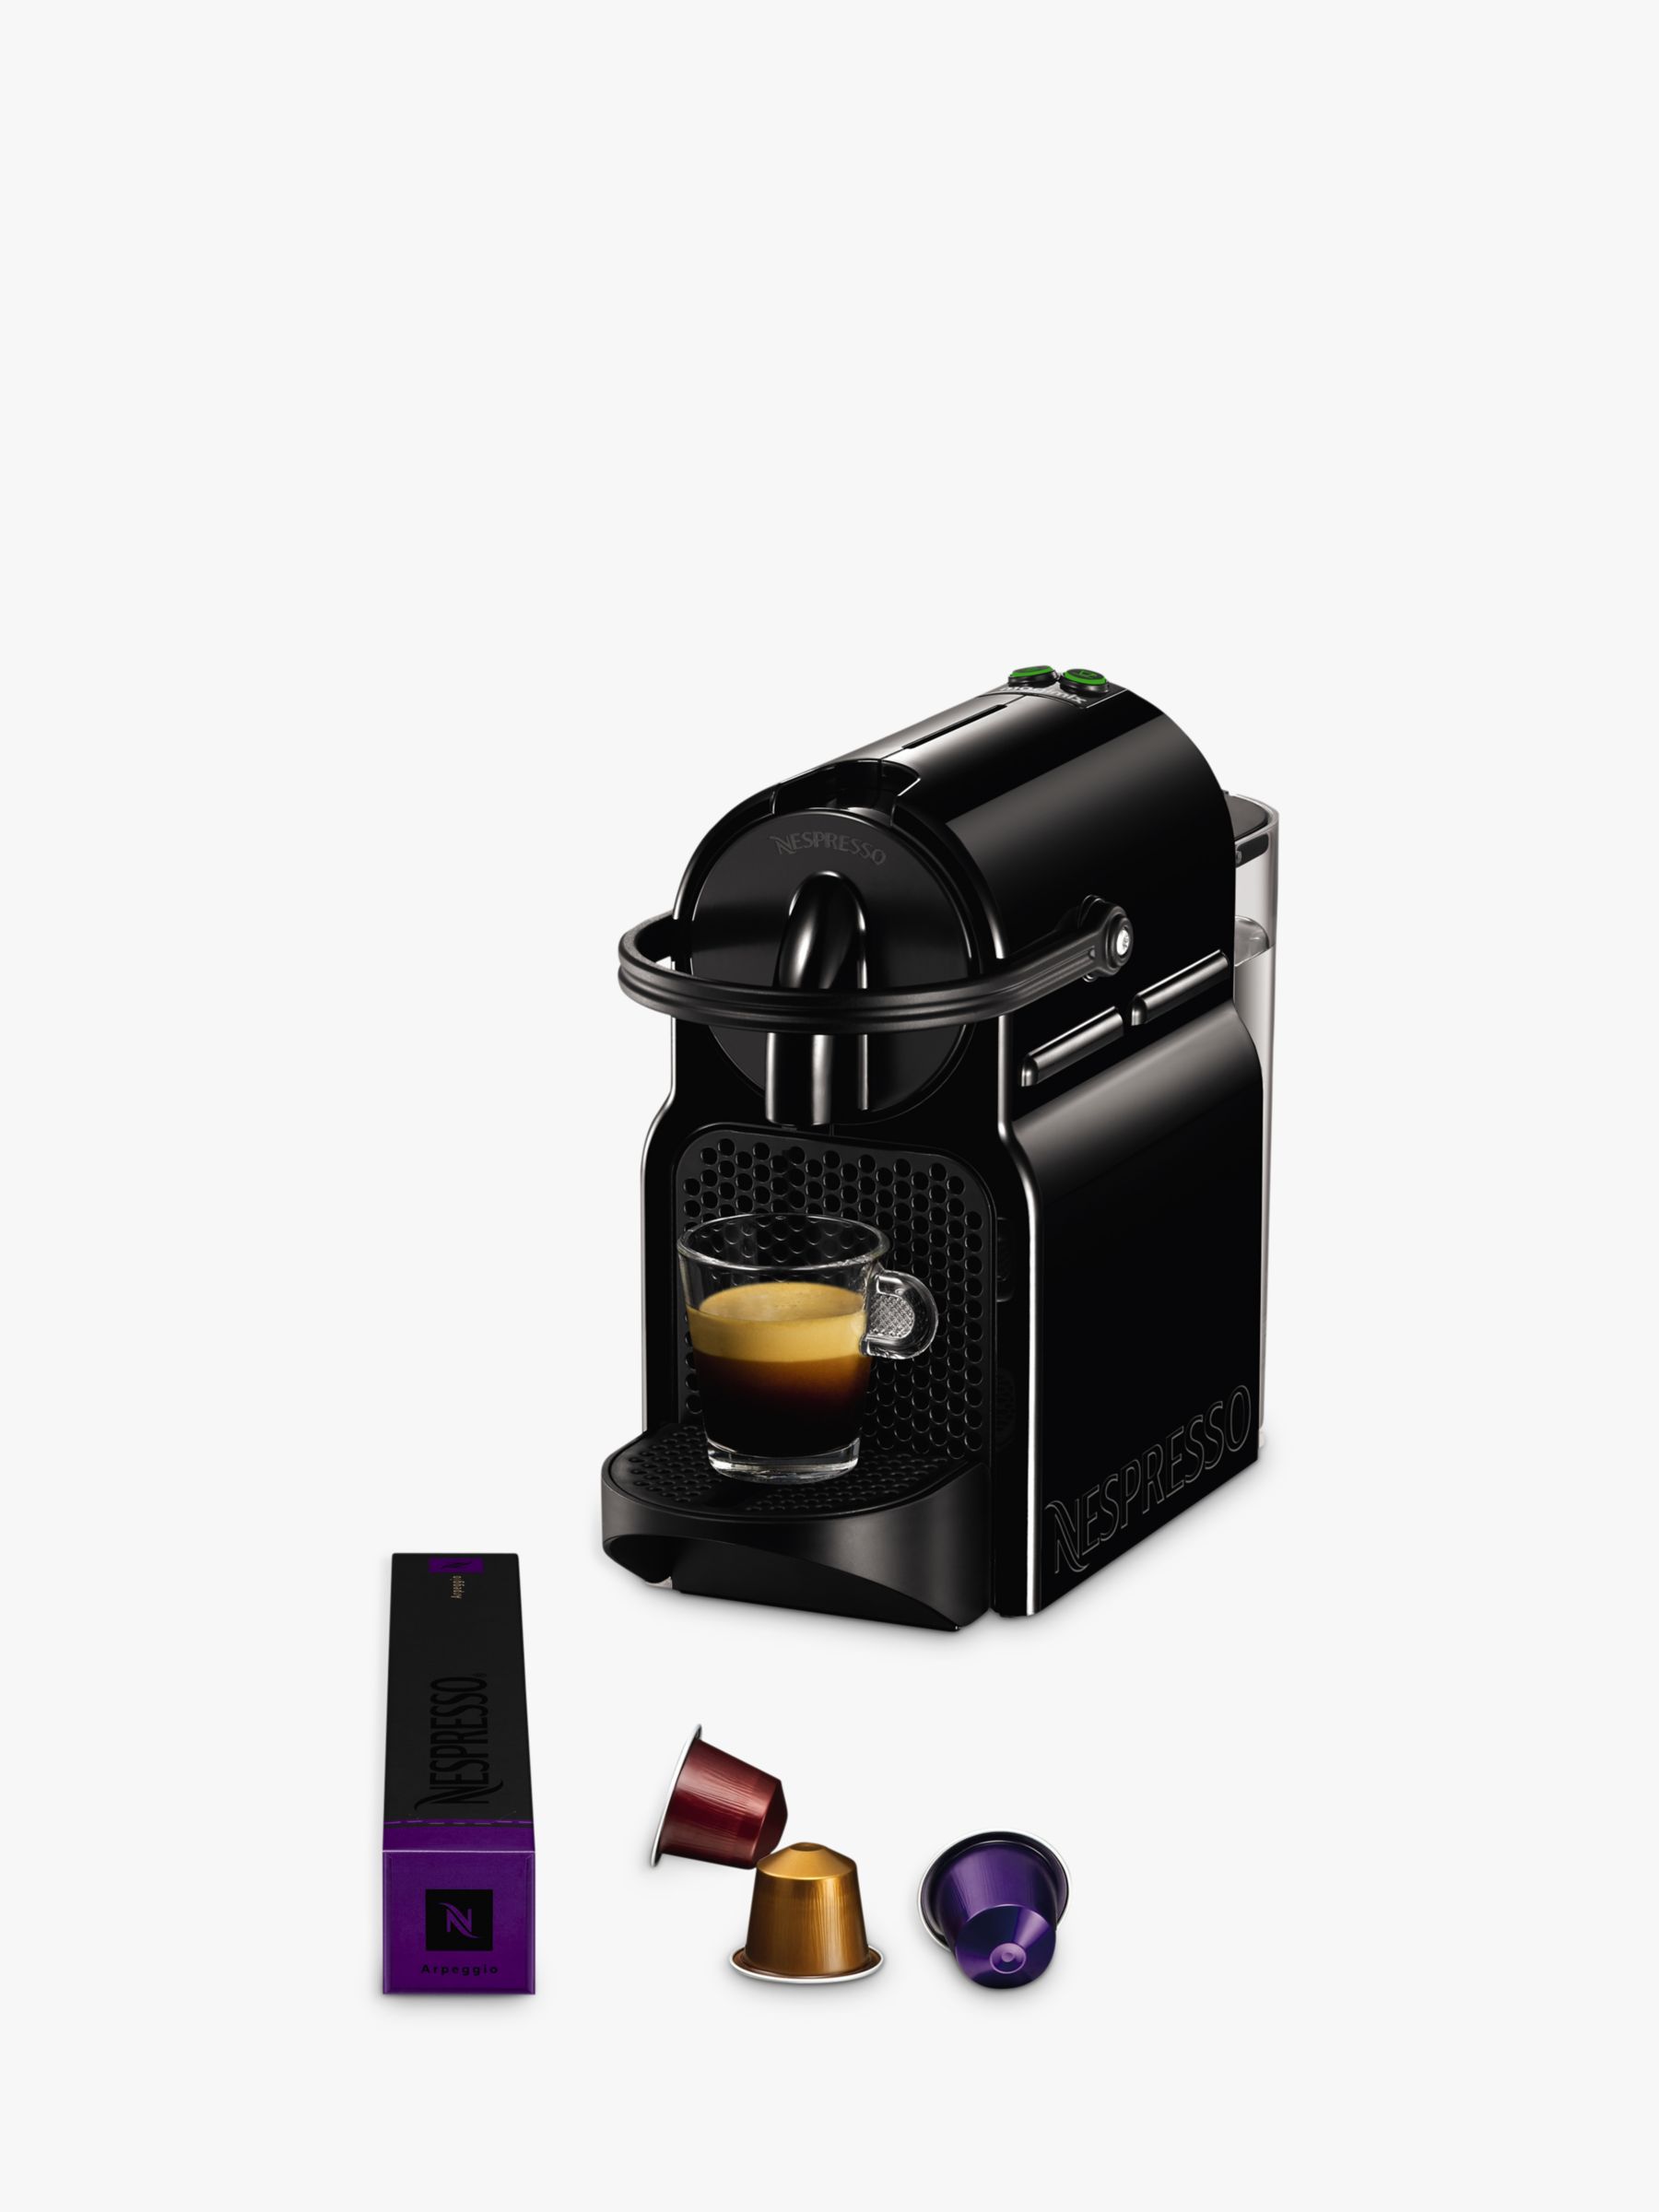 Total Overskyet spand Nespresso Inissia Coffee Machine by Magimix, Black